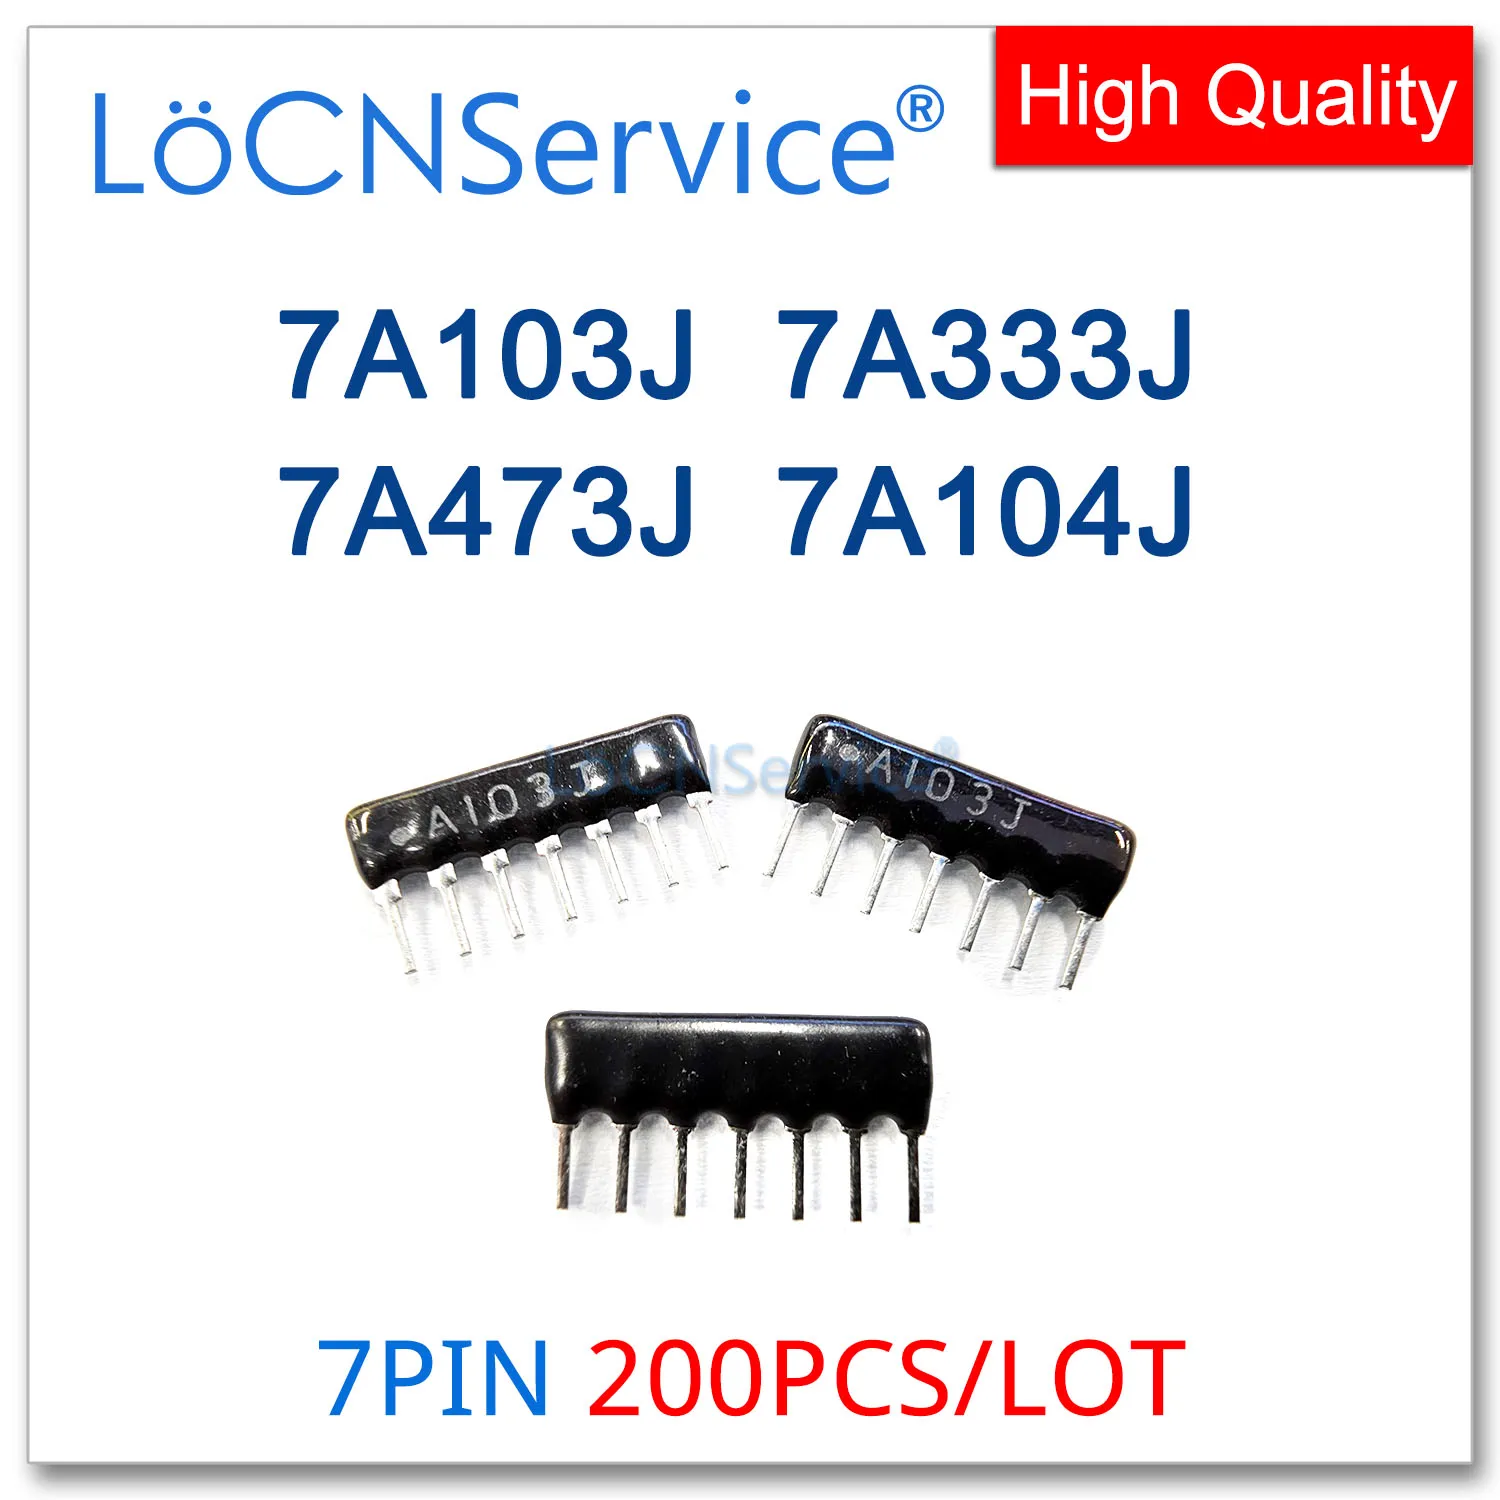 

LoCNService 200PCS 7PIN Exclusion Network Resistor array DIP 7A103J 7A333J 7A473J 7A104J 103 333 473 104 10K 33K 47K 100K OHM